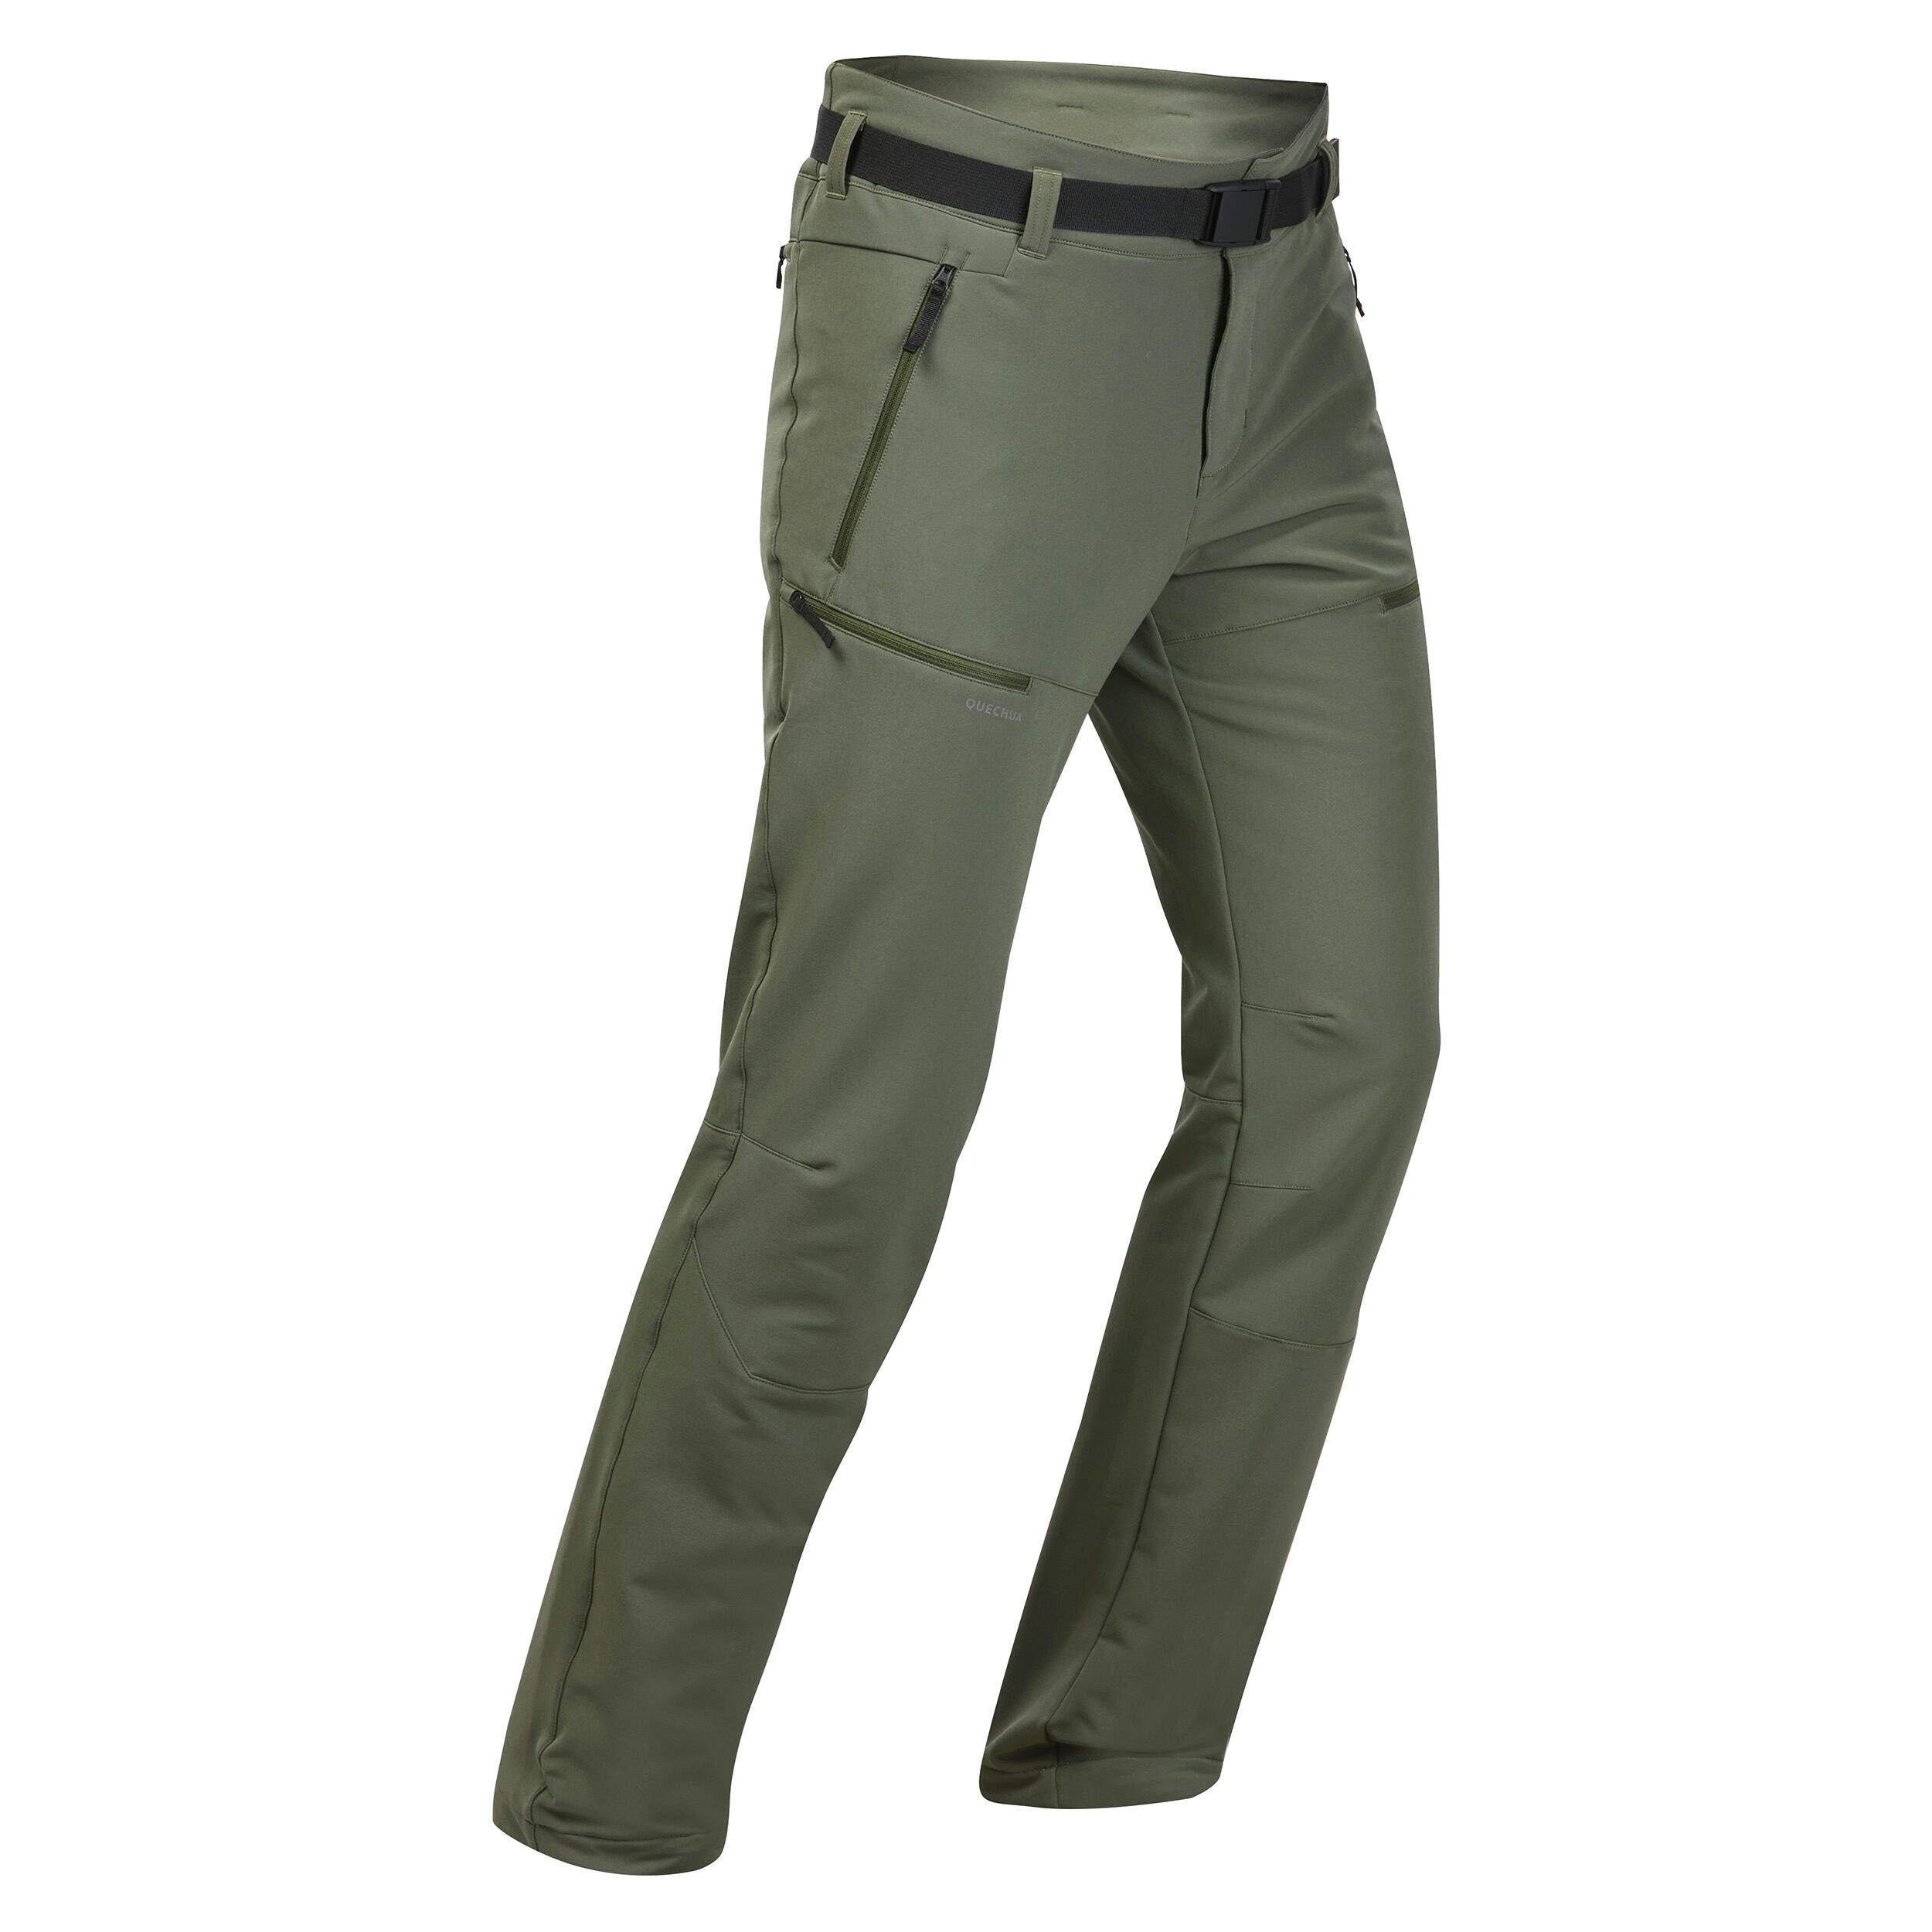 Warm and Silent Waterproof Trousers - Camo - Decathlon